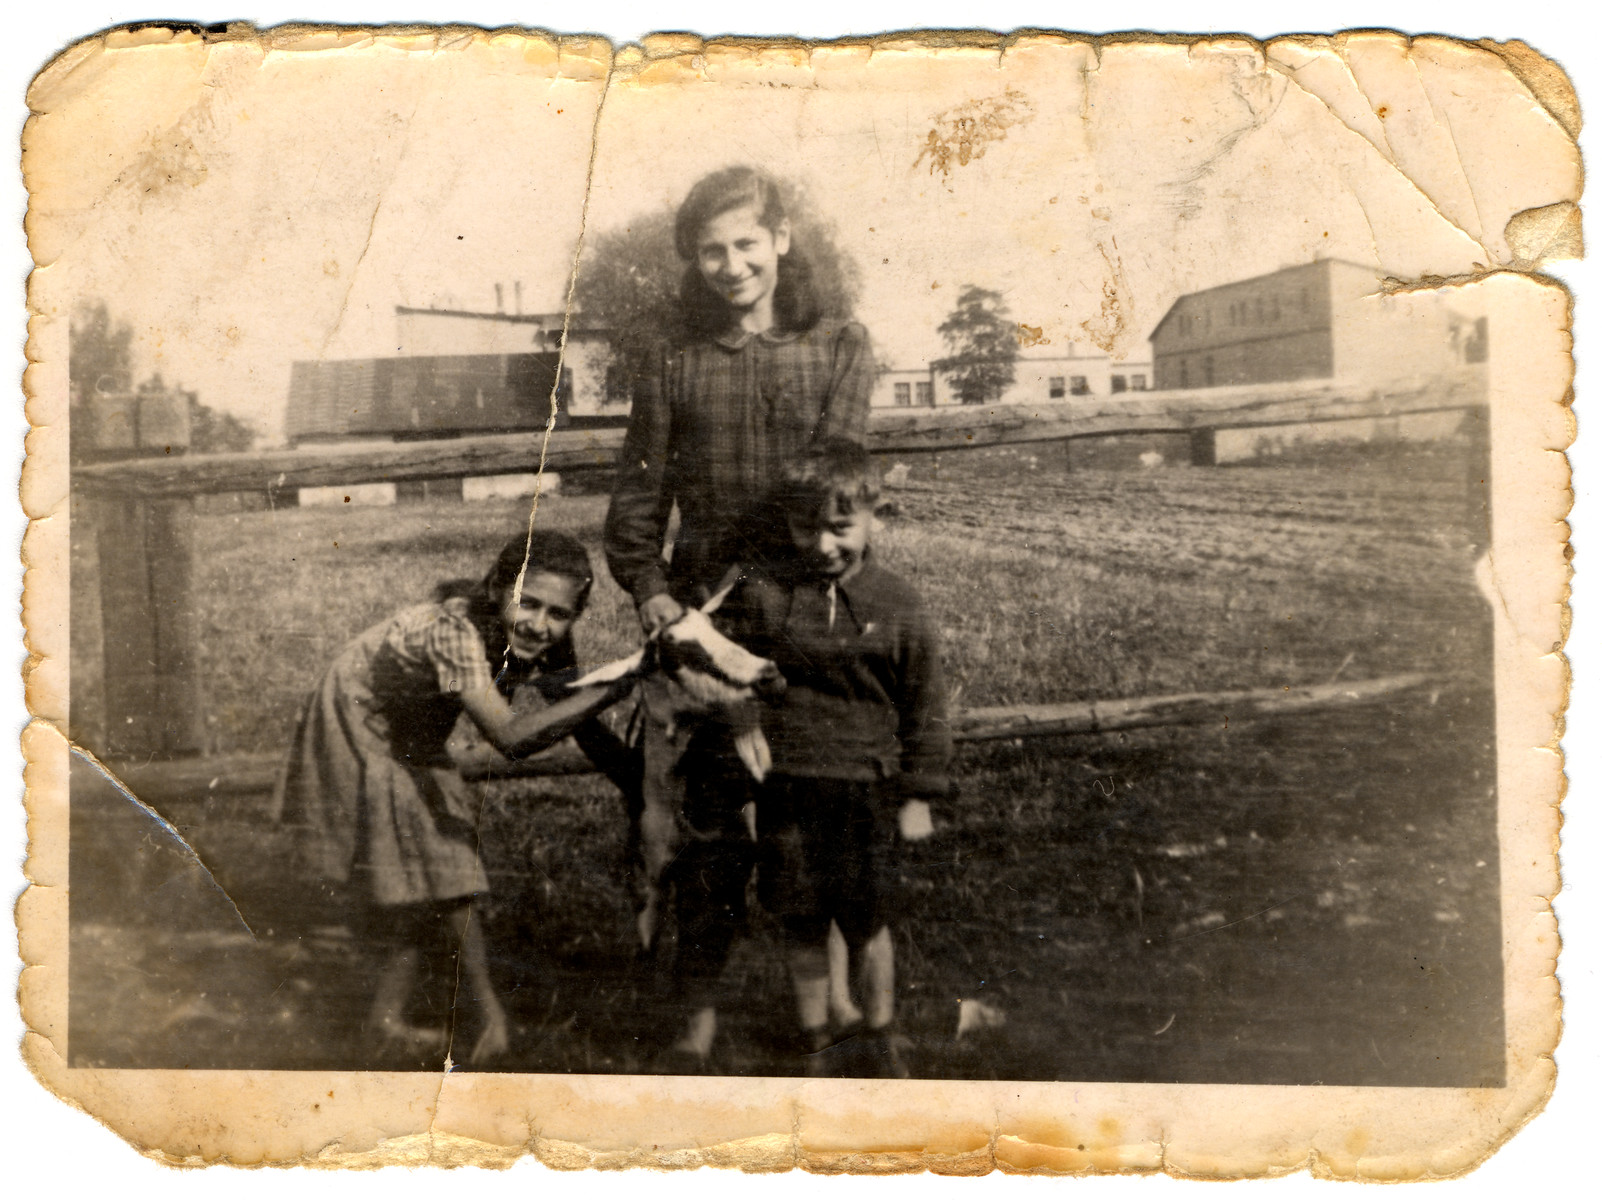 Three Jewish children pose next to a fence, holding a goat.

Pictured (left to right) are sisters Yentel, Sally, and Karol Slomnicki.  Sally carried this photo with her in her shoe throughout her time in forced labor camps.